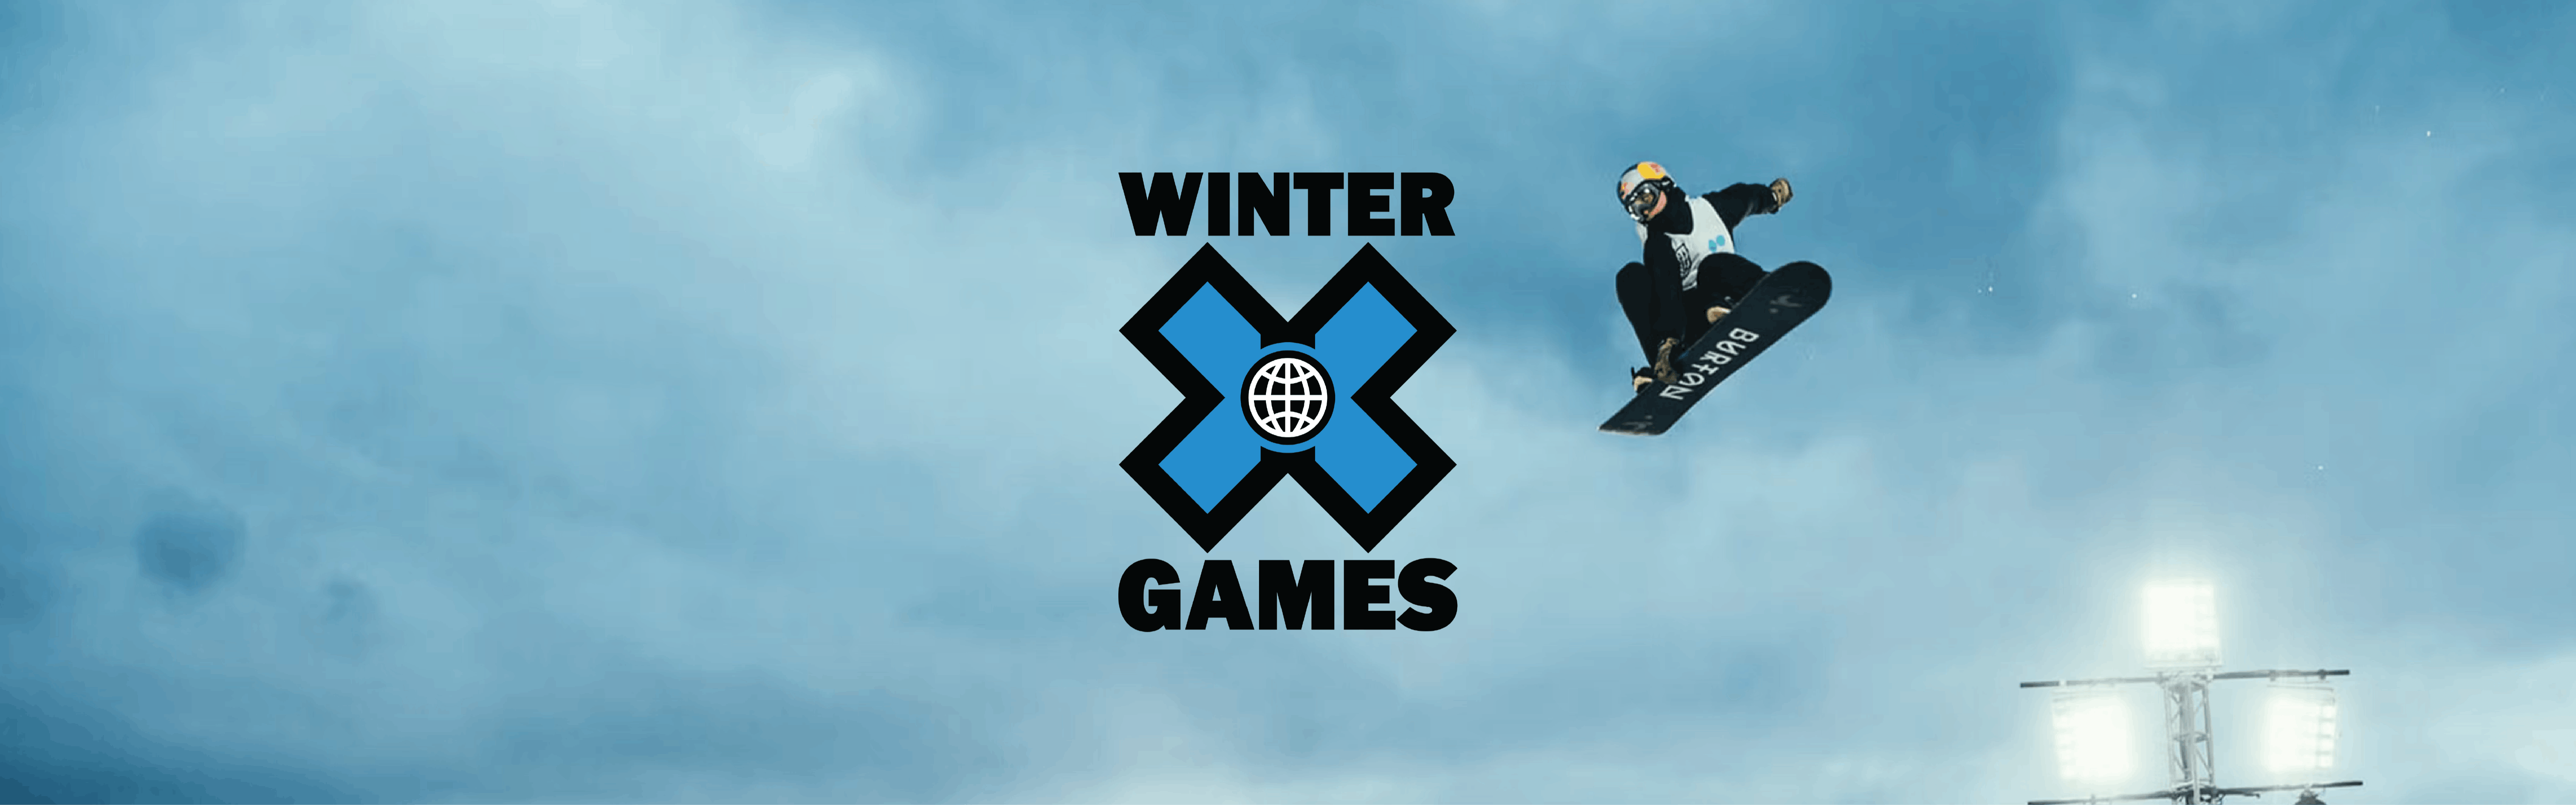 A snowboarder jumps and grabs the bottom of their board in dimming light. Huge stadium lights are illuminated below them. The Winter X Games logo is in the center of the image.